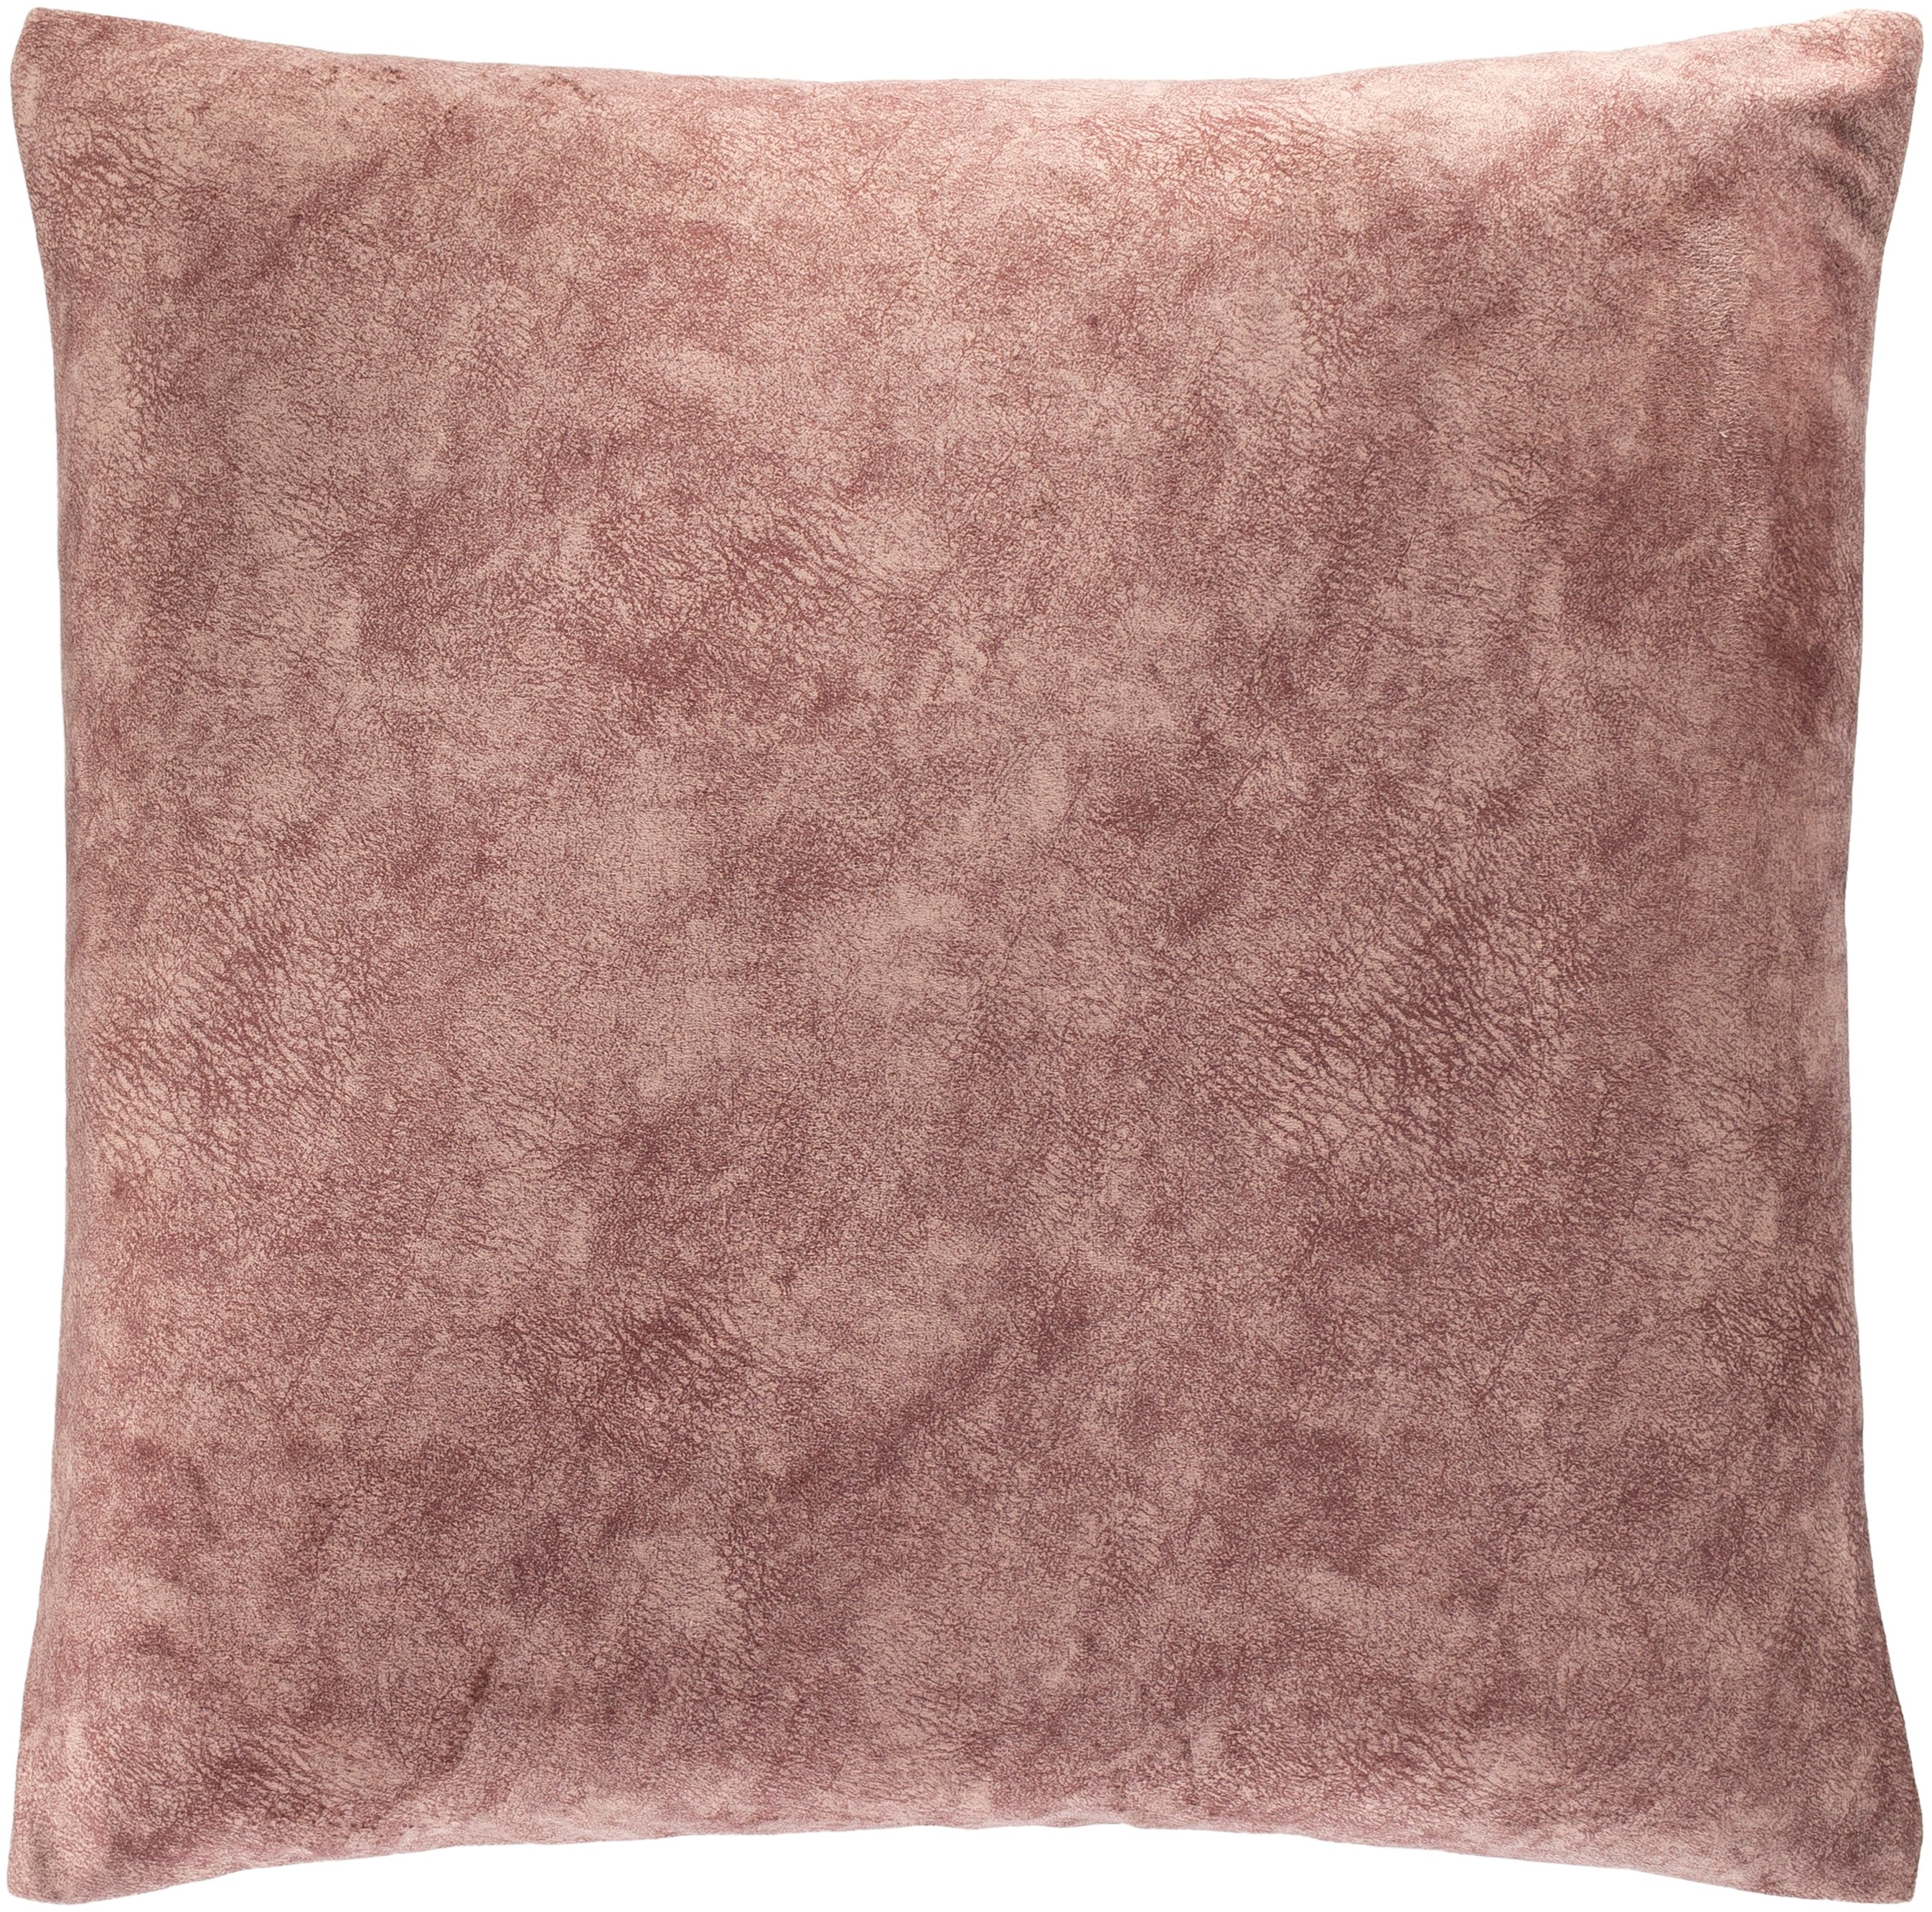 Collins - OIS-006 - 20" x 20" - pillow cover only - Image 0